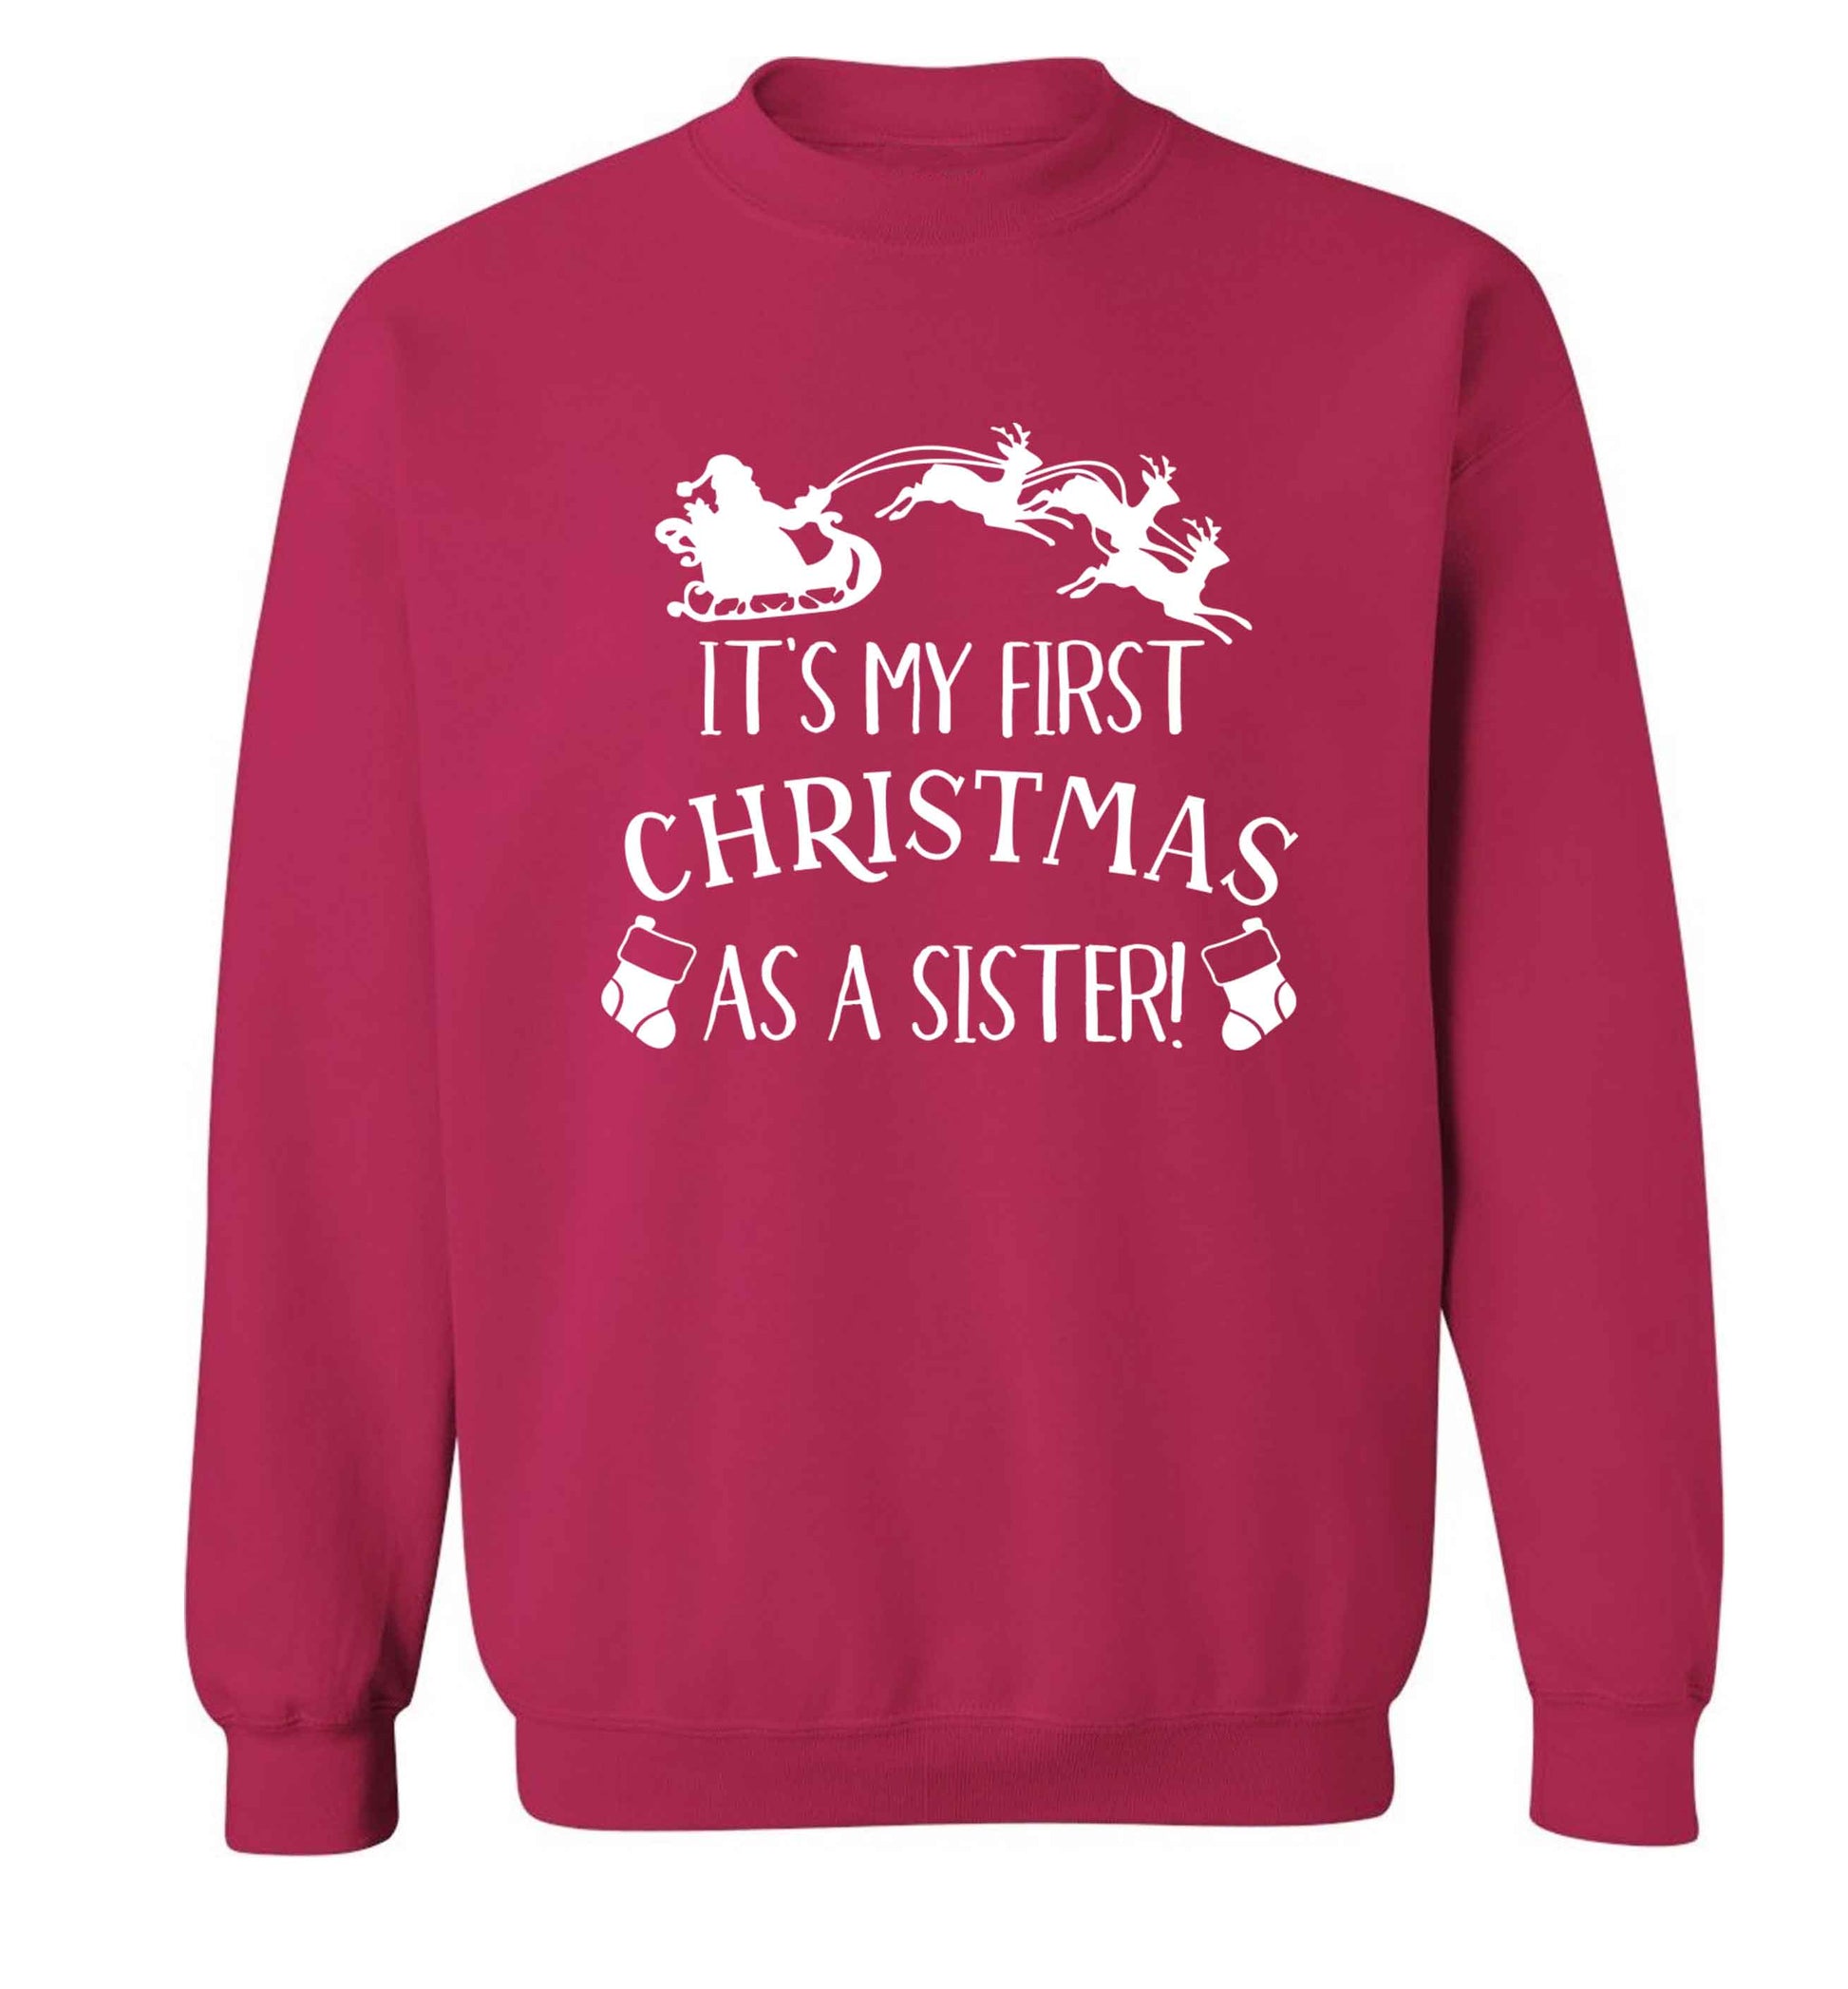 It's my first Christmas as a sister! Adult's unisex pink Sweater 2XL